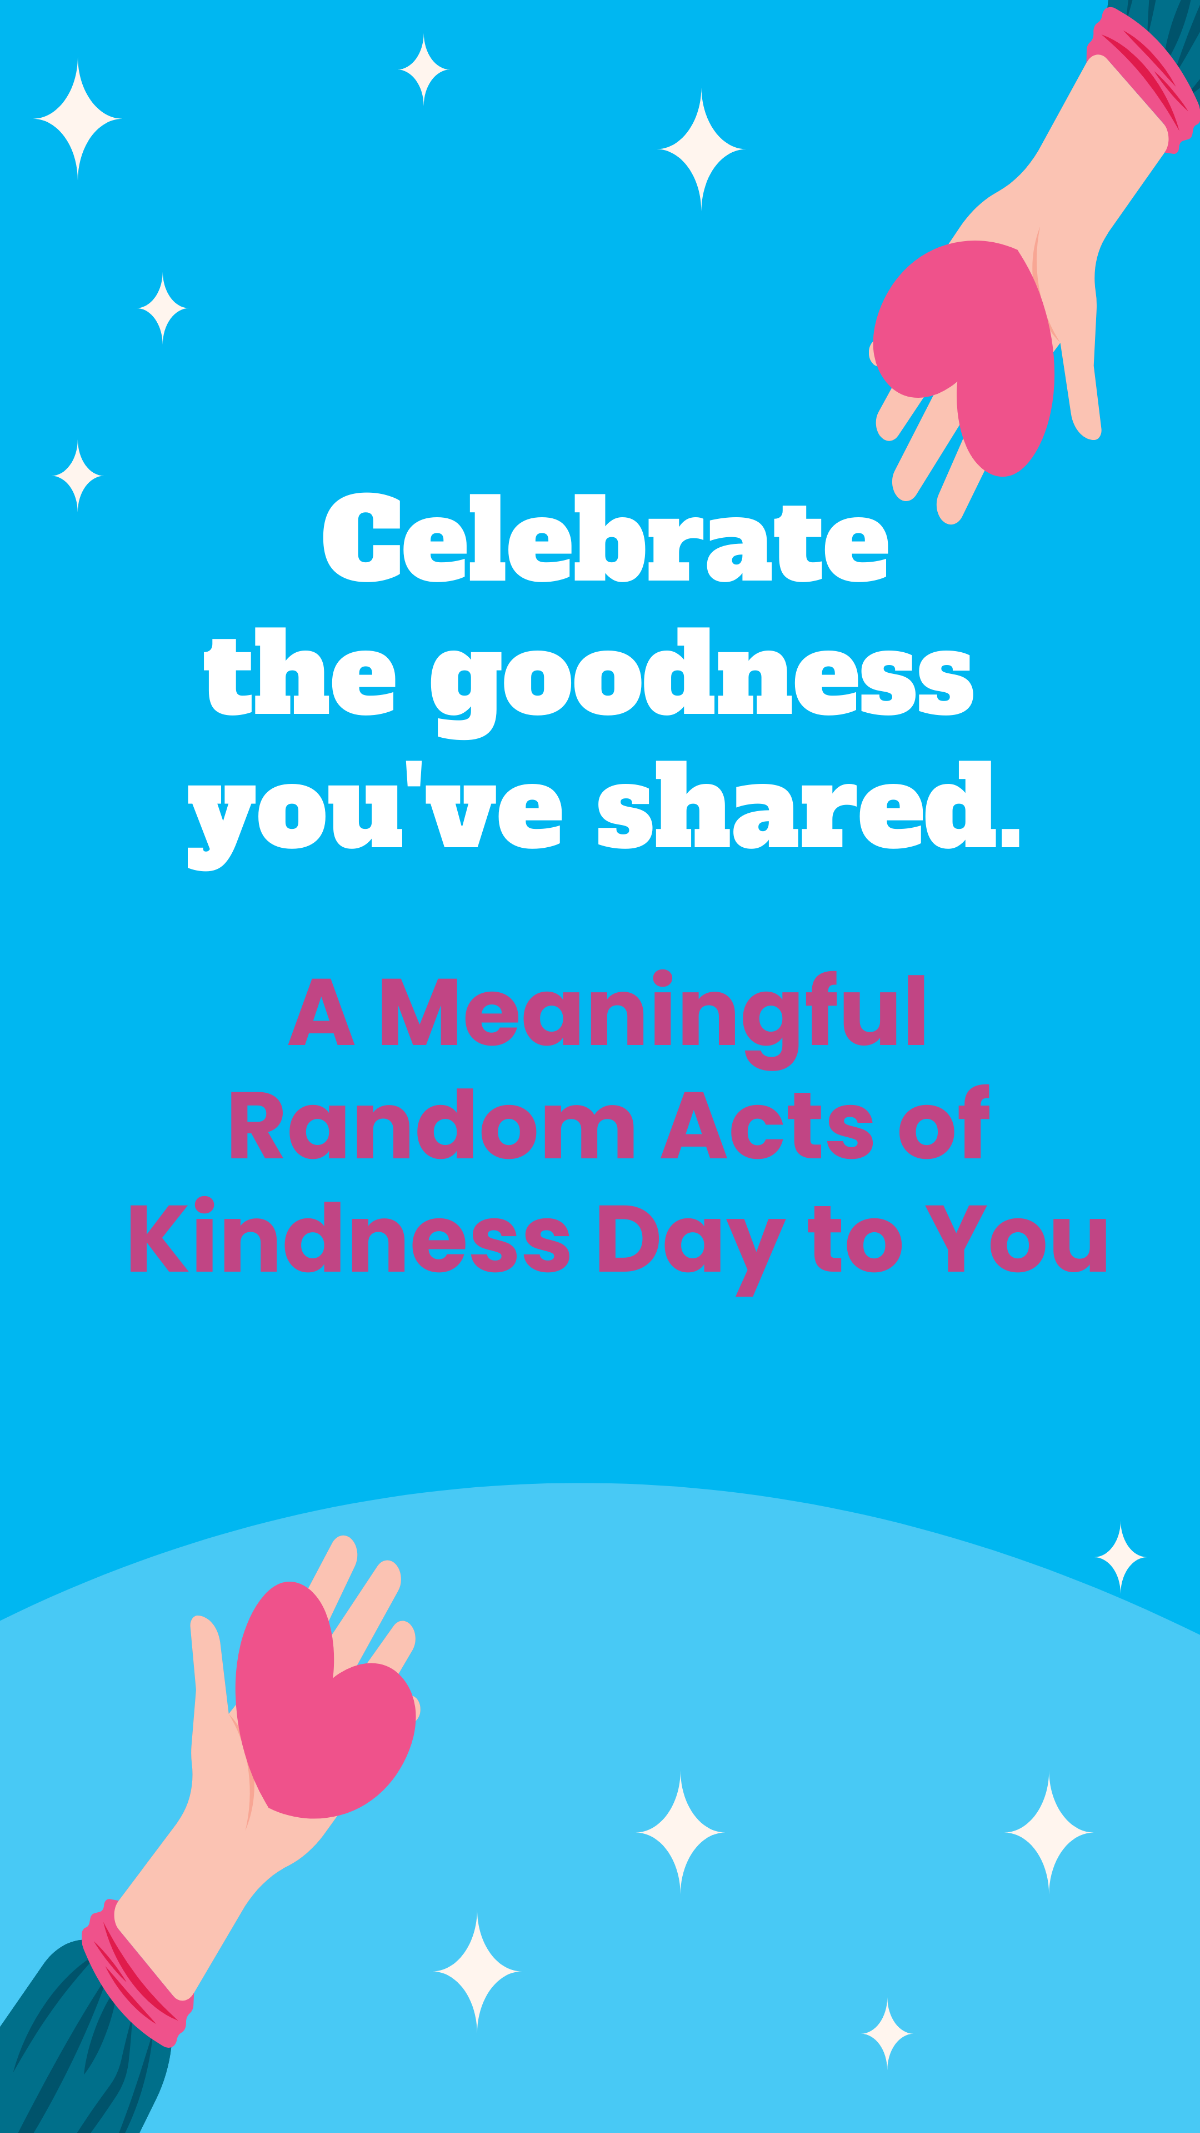 Random Acts of Kindness Day Greeting Card Template - Edit Online ...